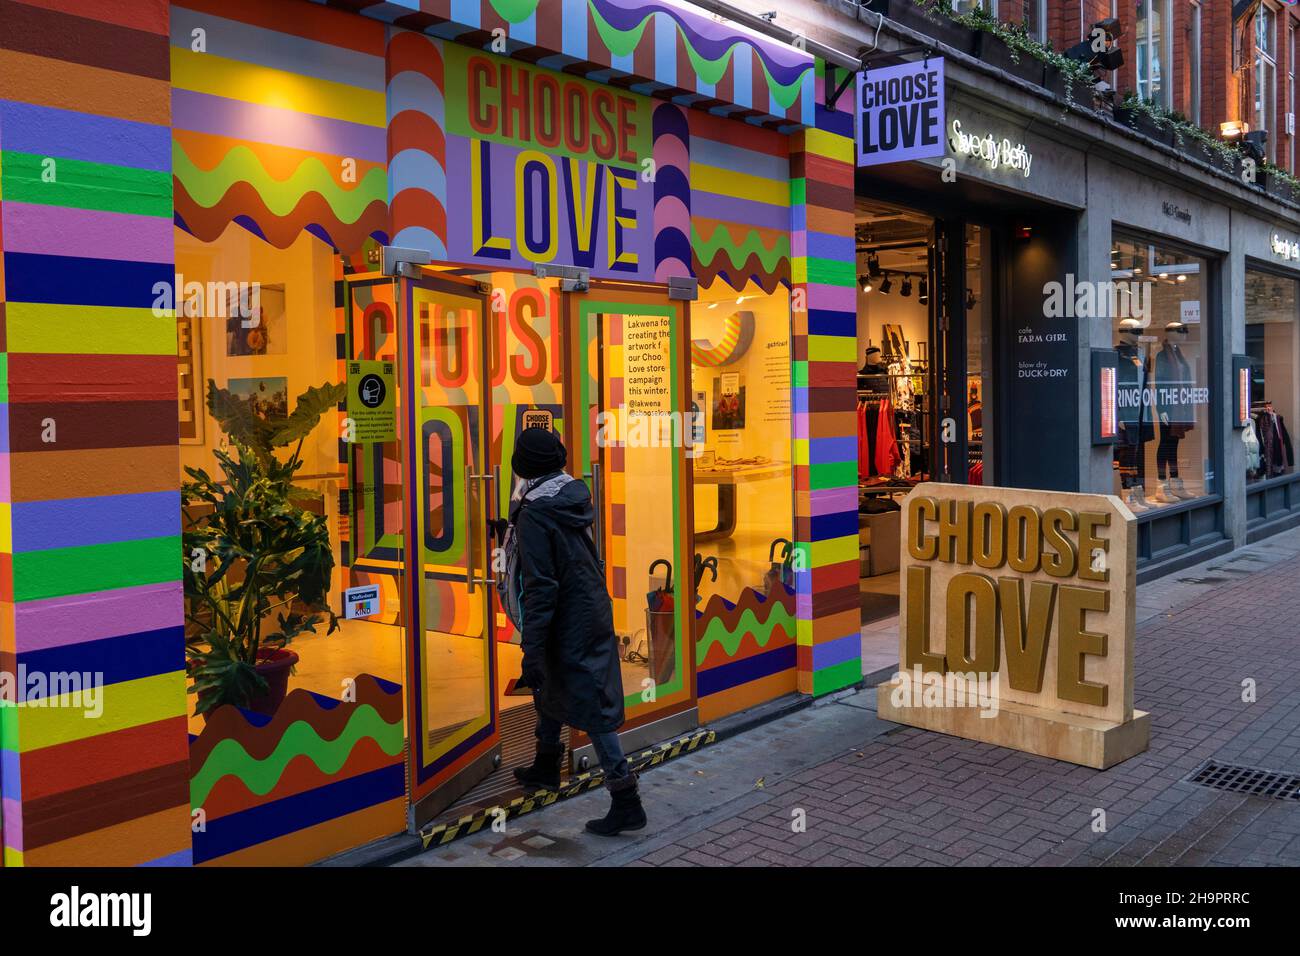 Pop Up Shop London High Resolution Stock Photography and Images - Alamy